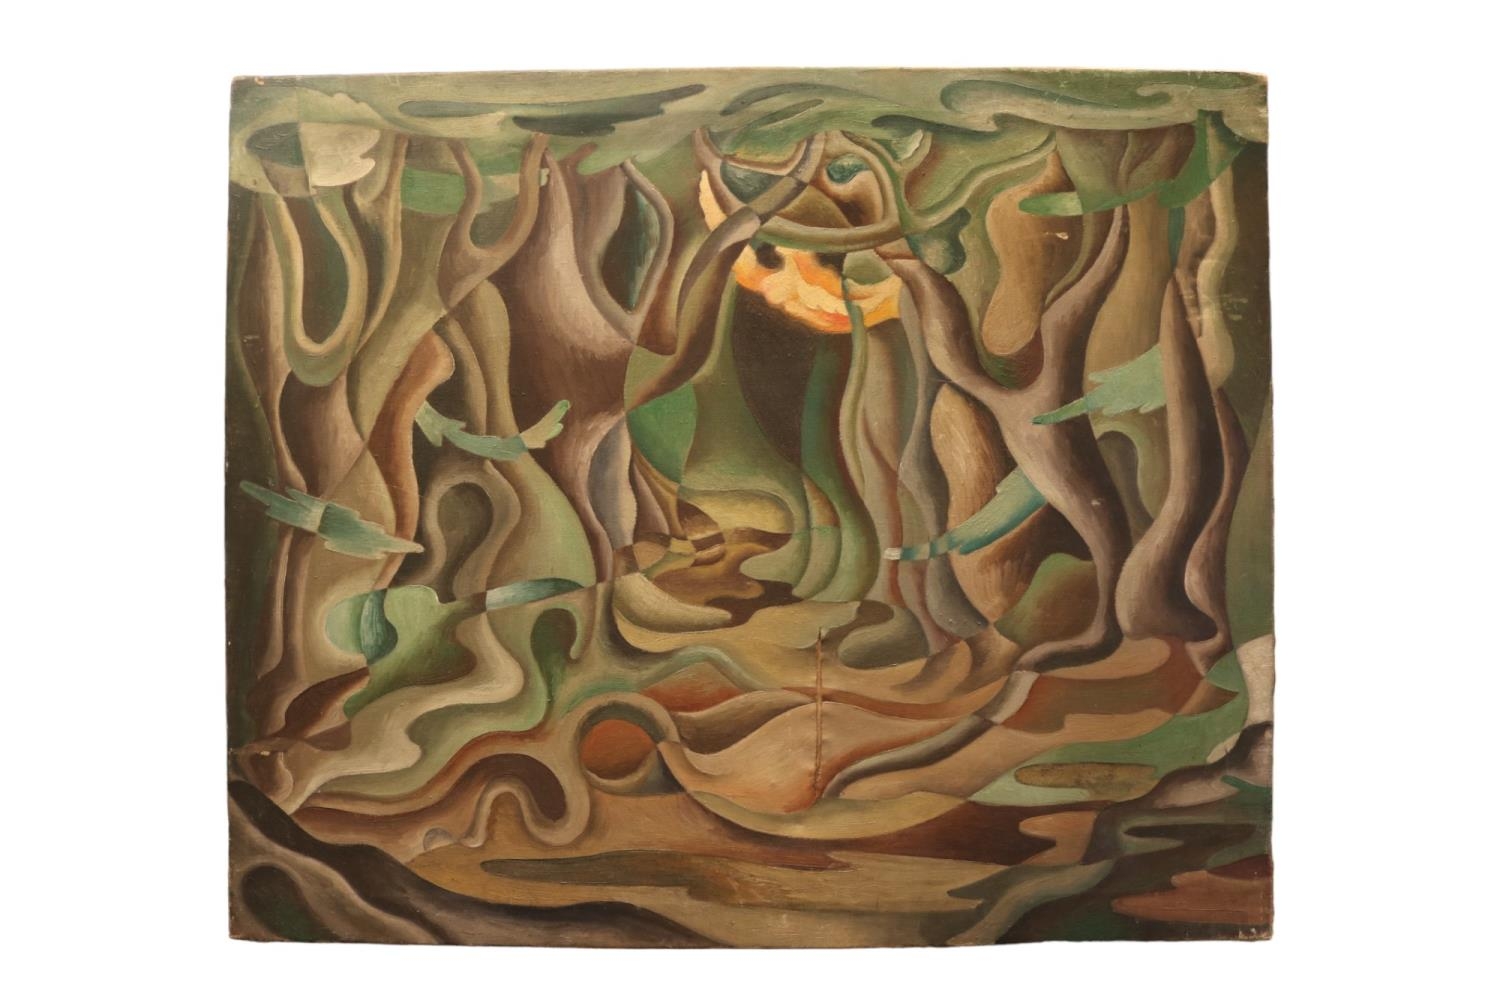 Original 1930's Surrealist oil on canvas depicting a forest scape in moonlight, in the style of